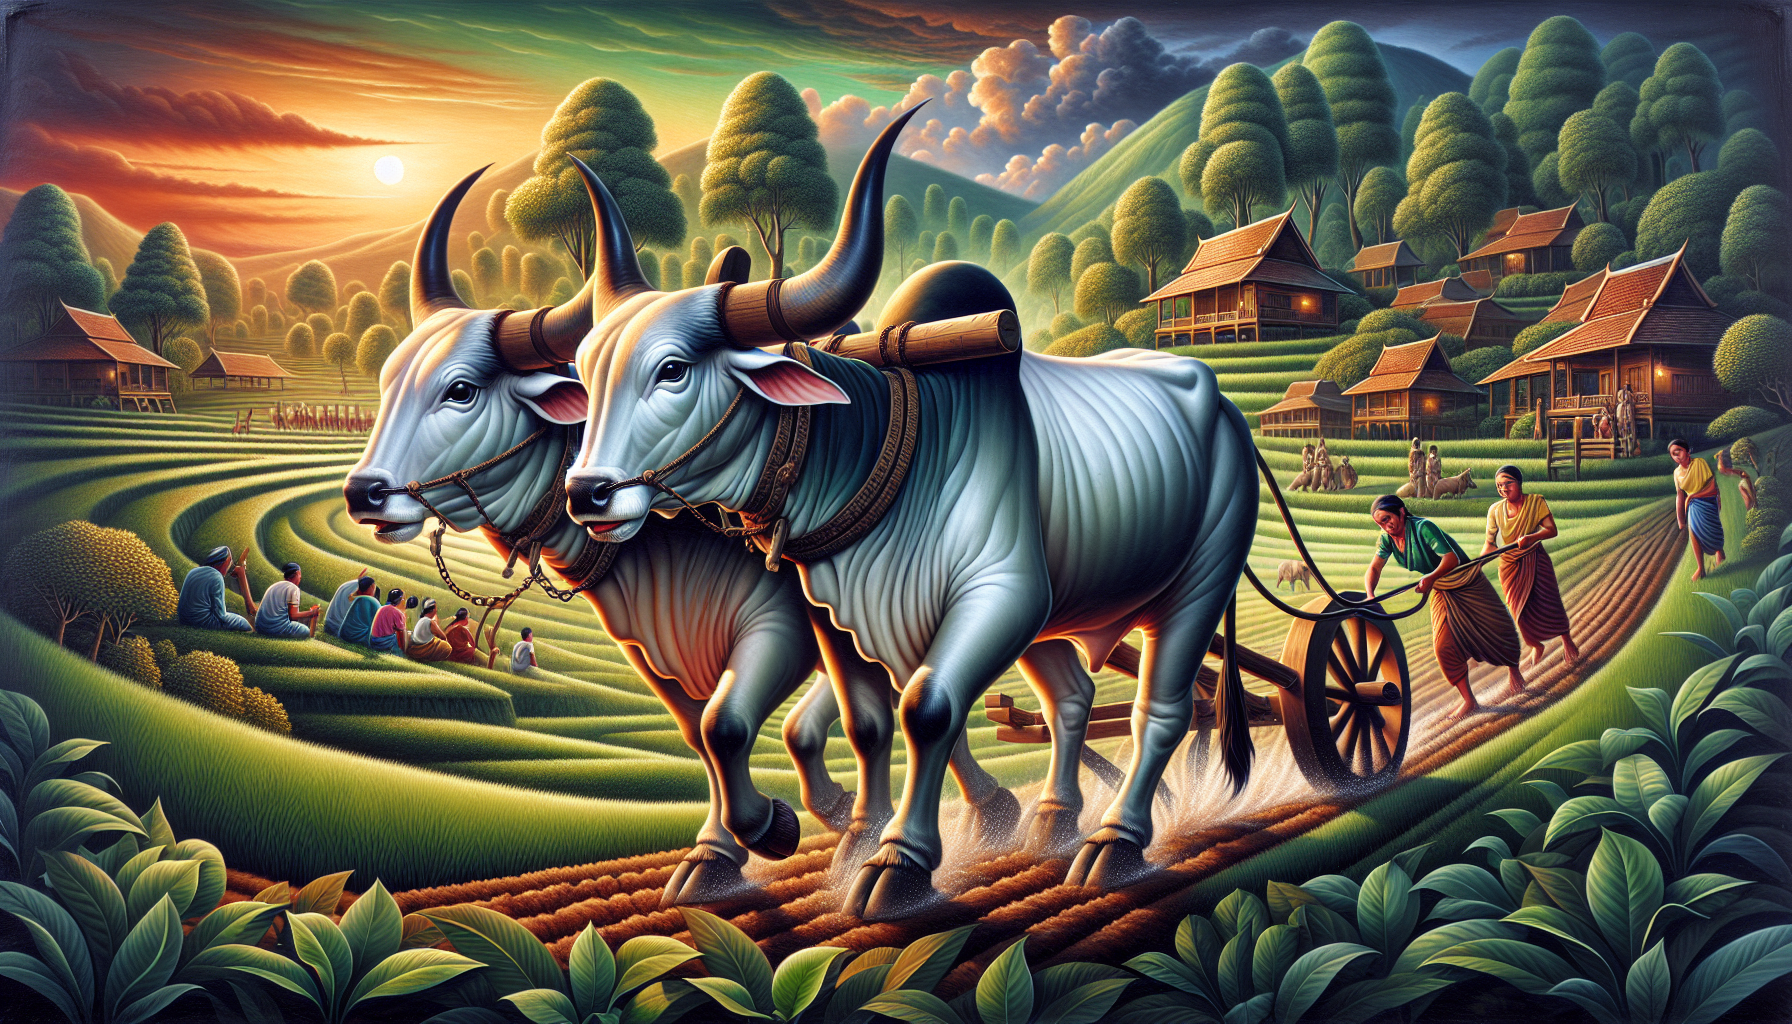 Illustration of oxen in cultural context